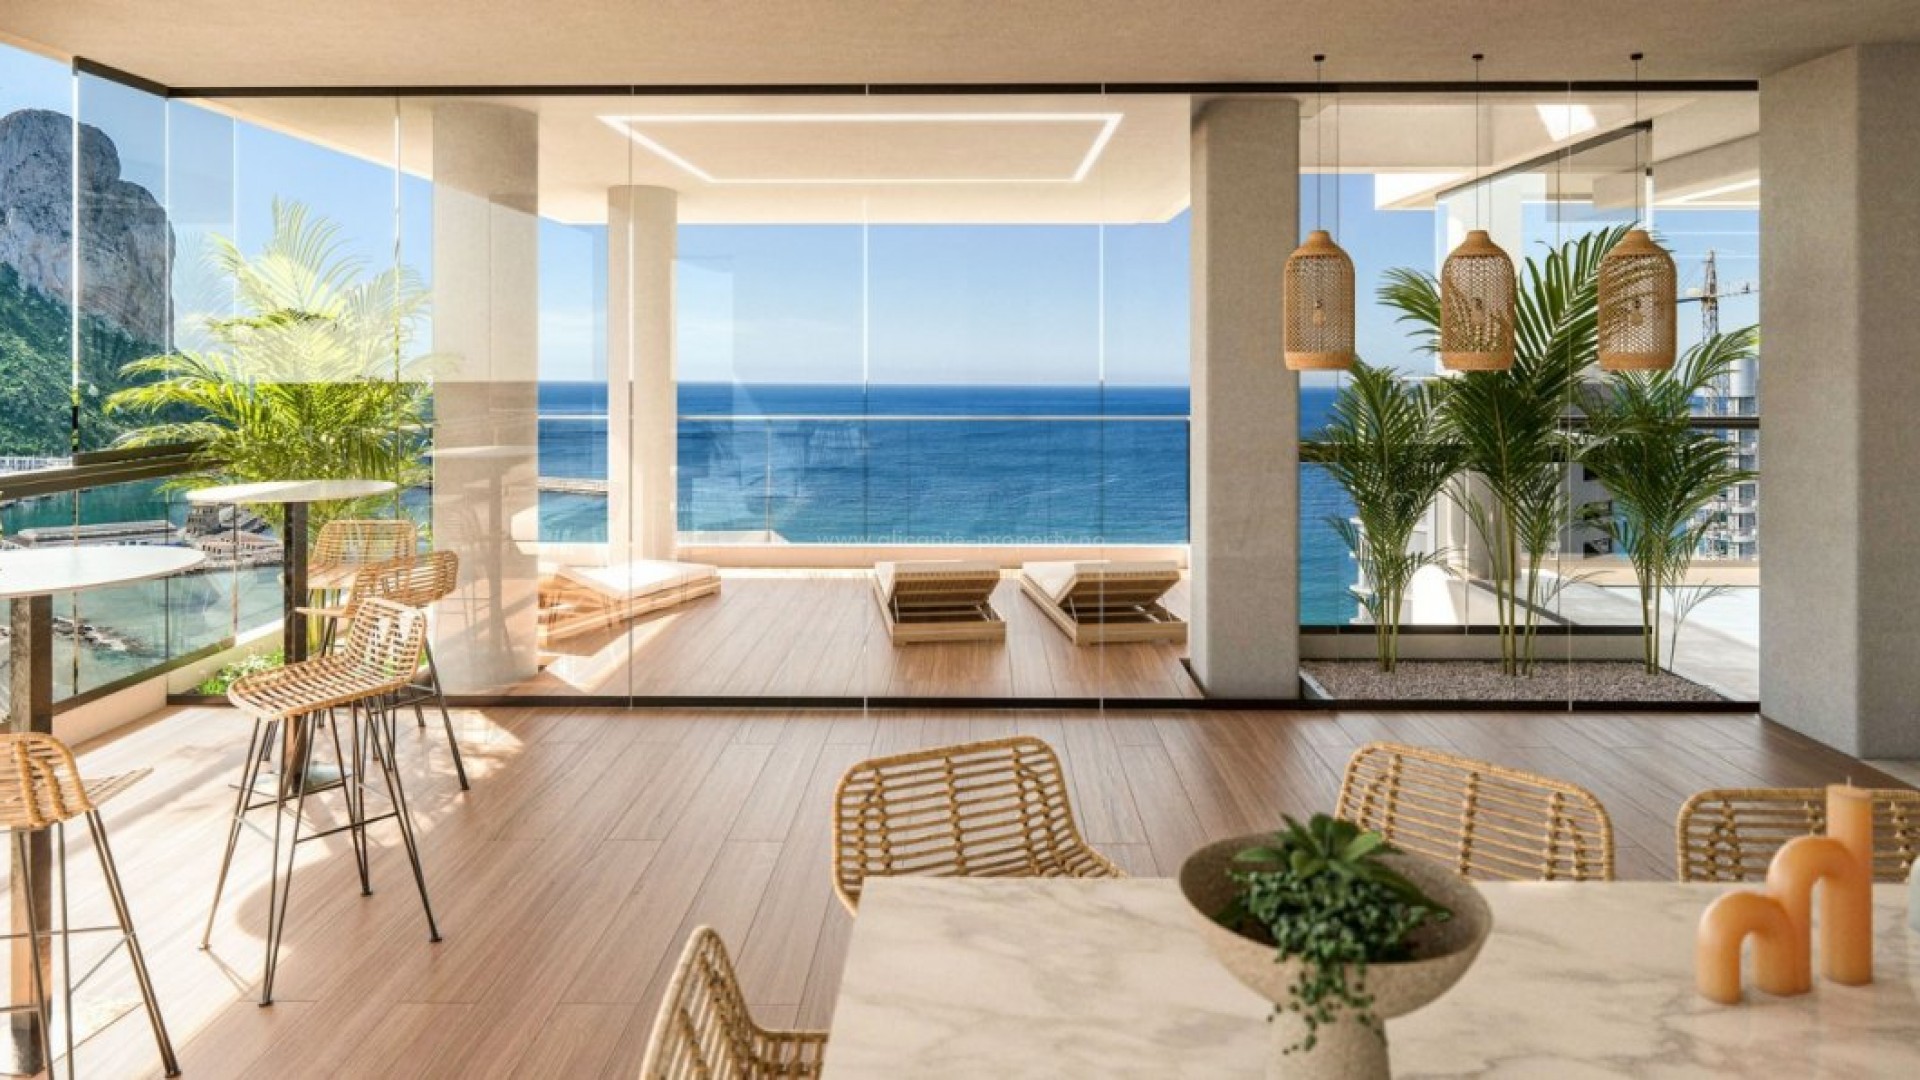 New built luxury penthouse in Calpe with sea view, 3 bedrooms, 2 bathrooms, large terraces, large communal areas with gardens, swimming pool, paddle tennis, children's area